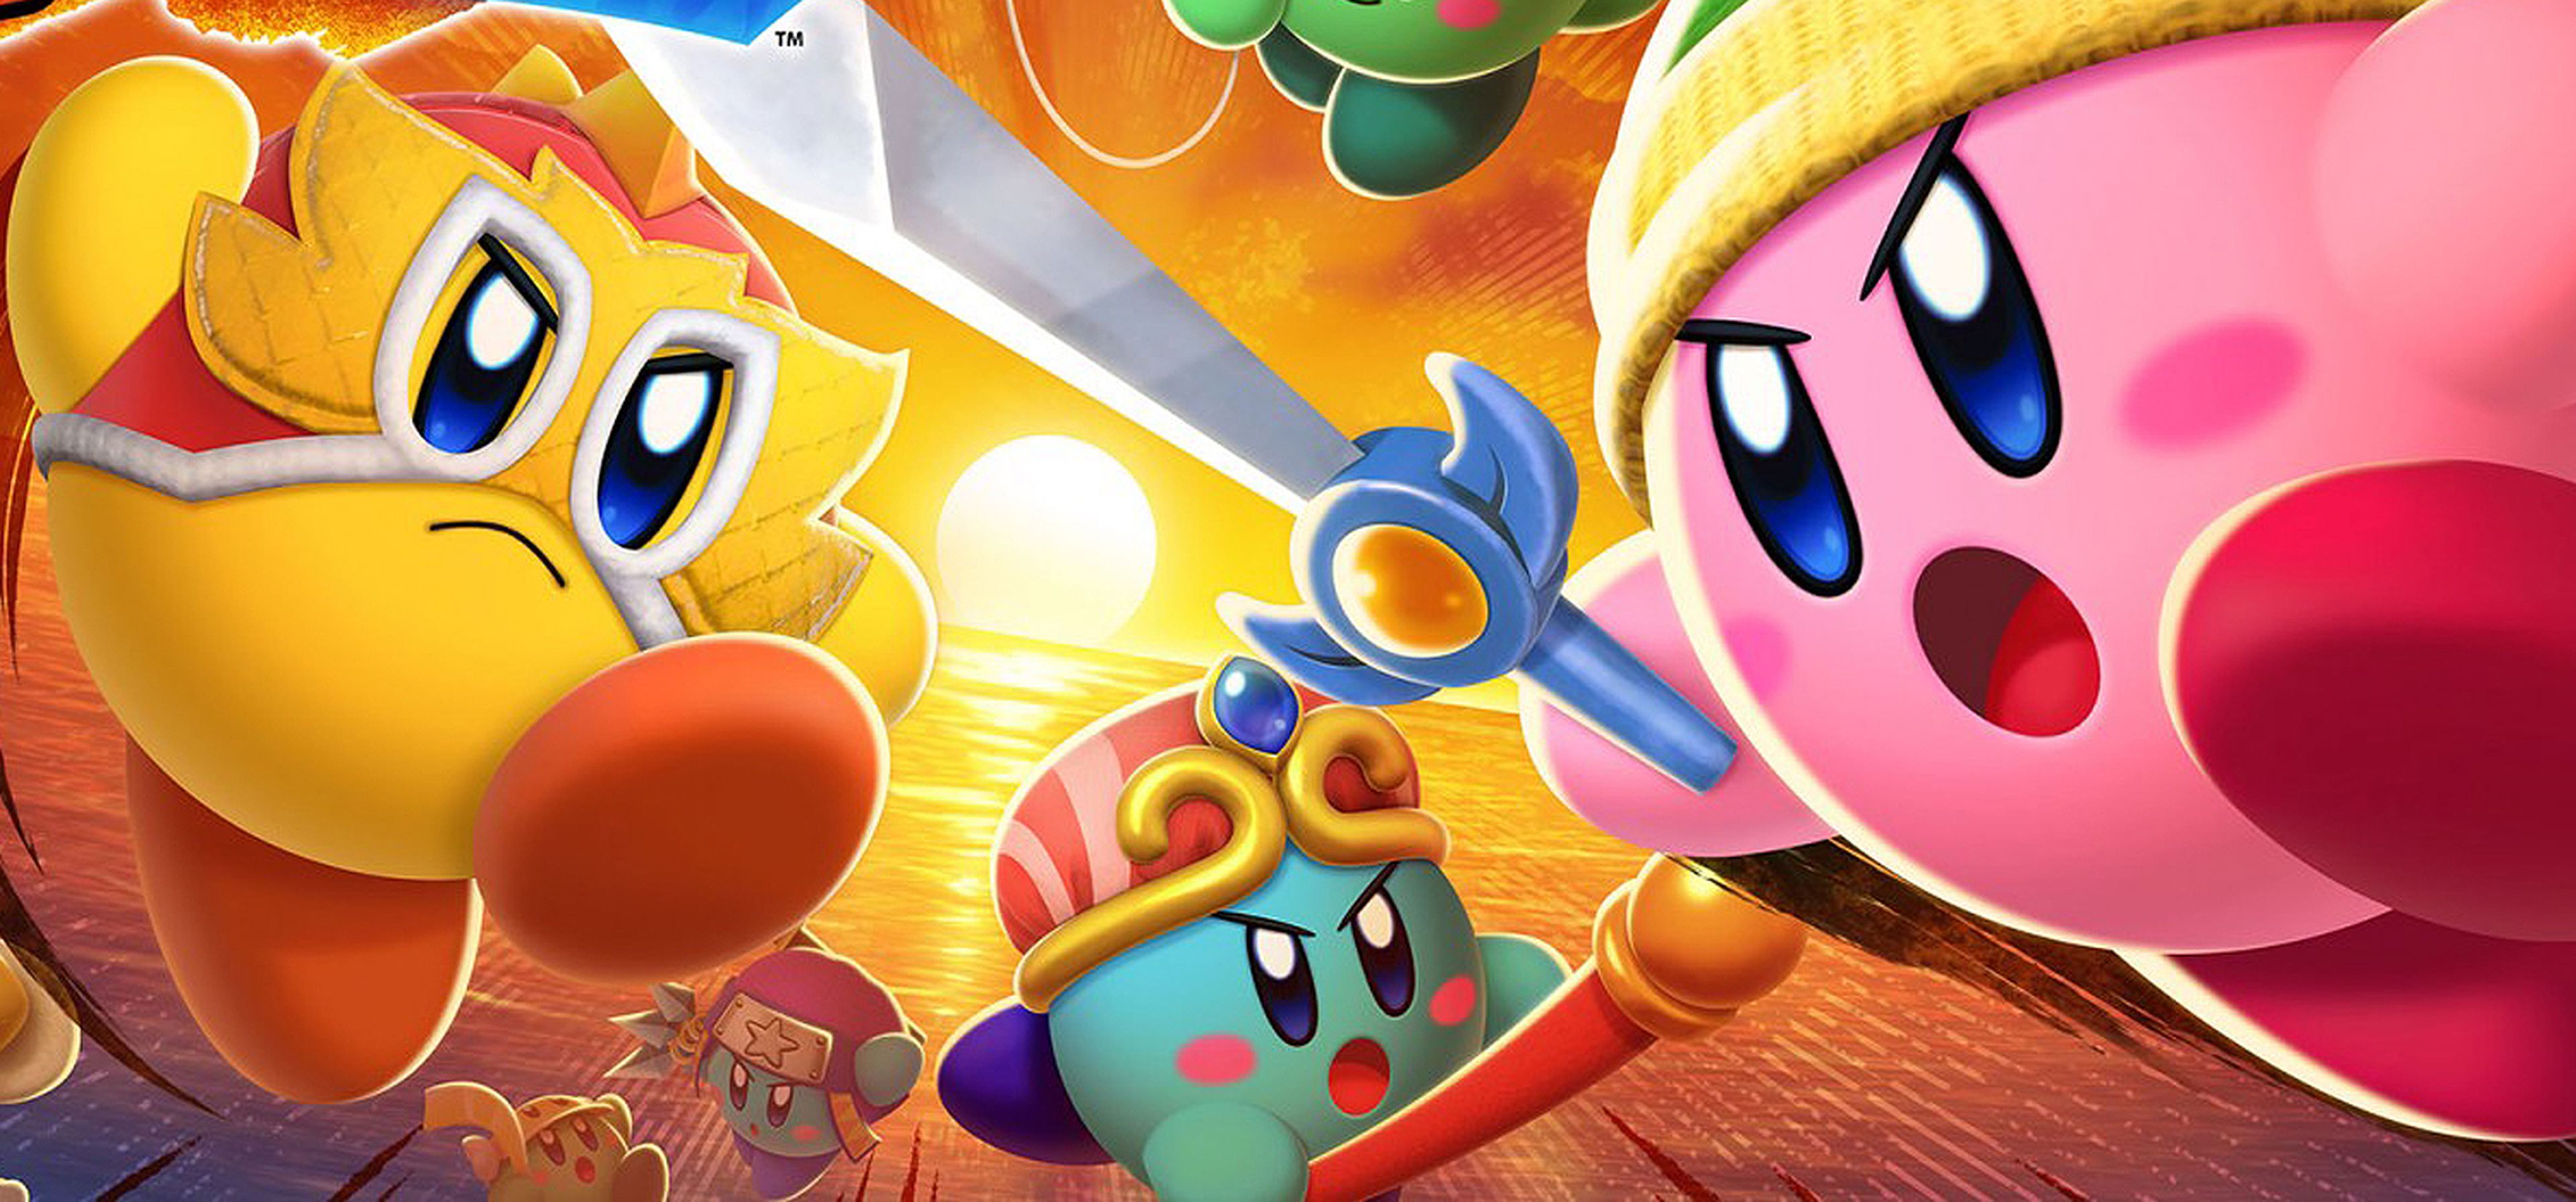 Kirby Fighters 2